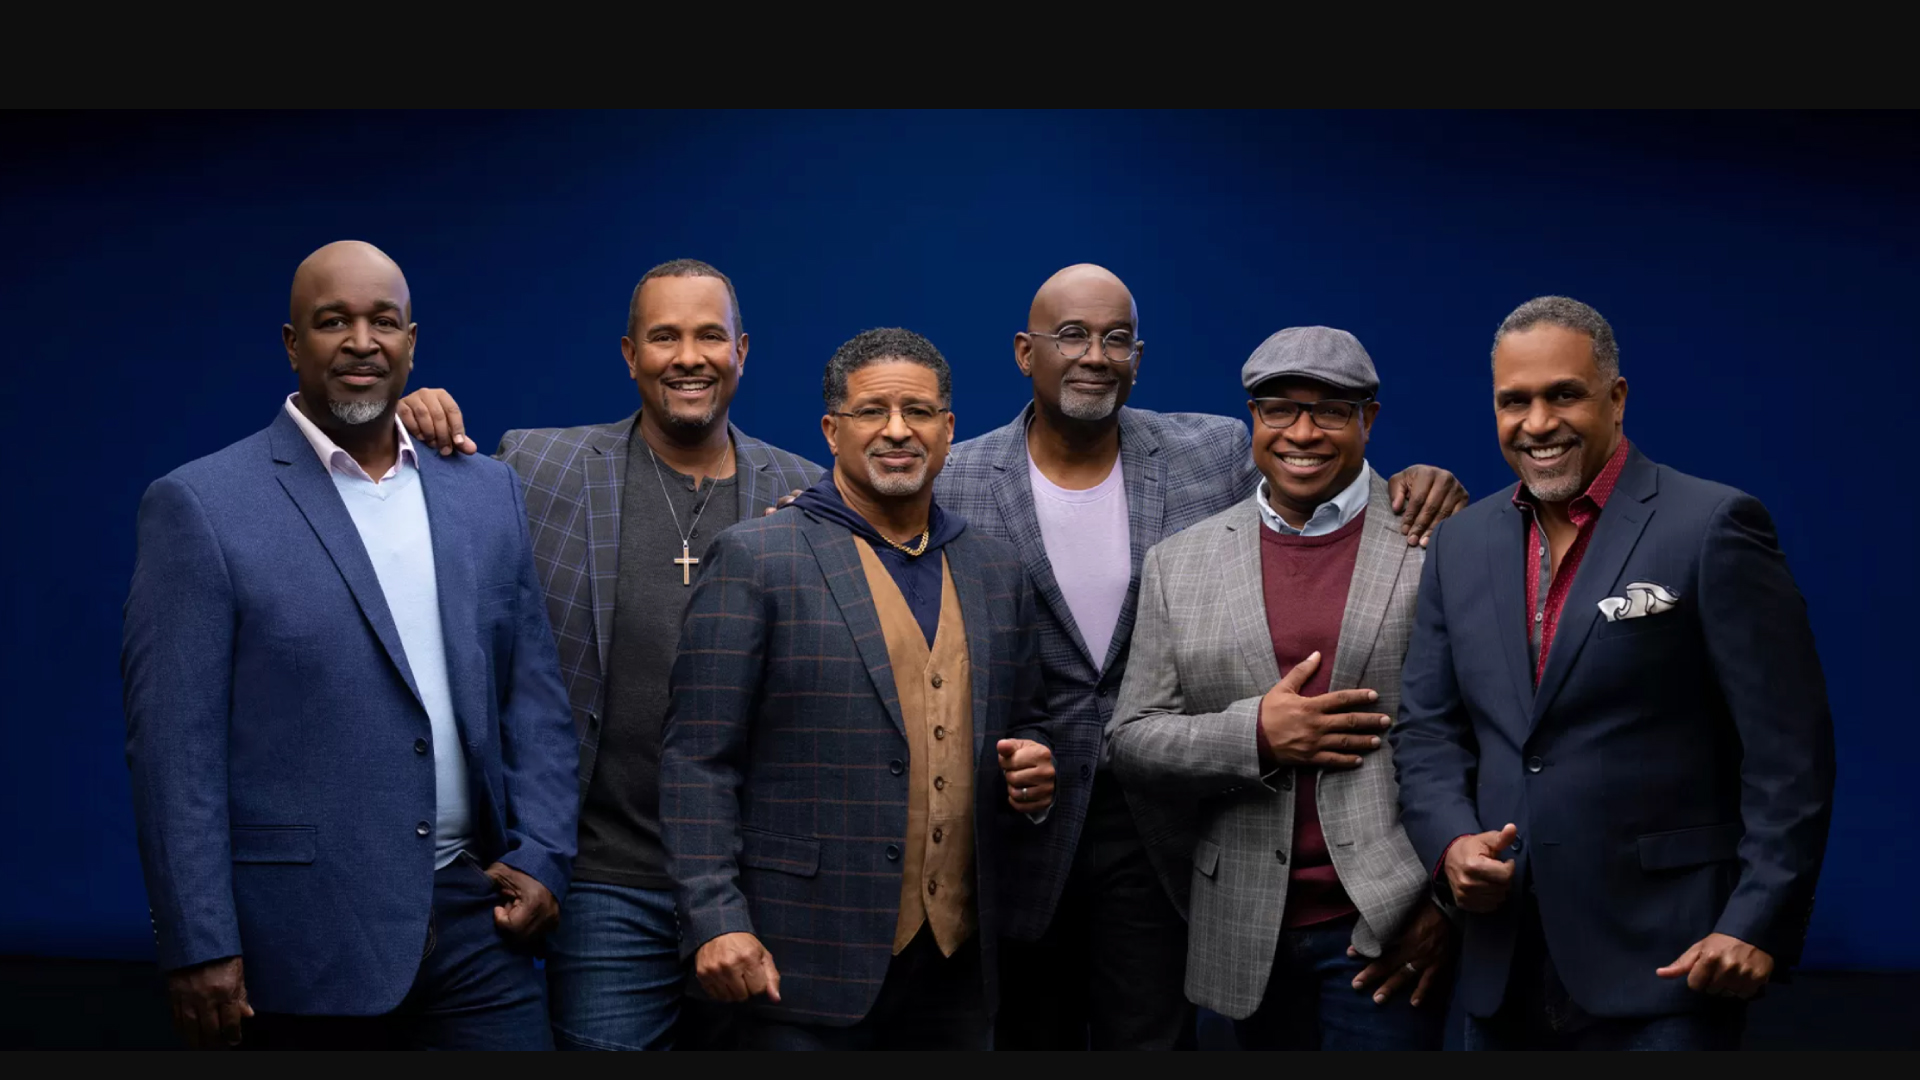 Take 6 Members of the Gospel Music Hall of Fame